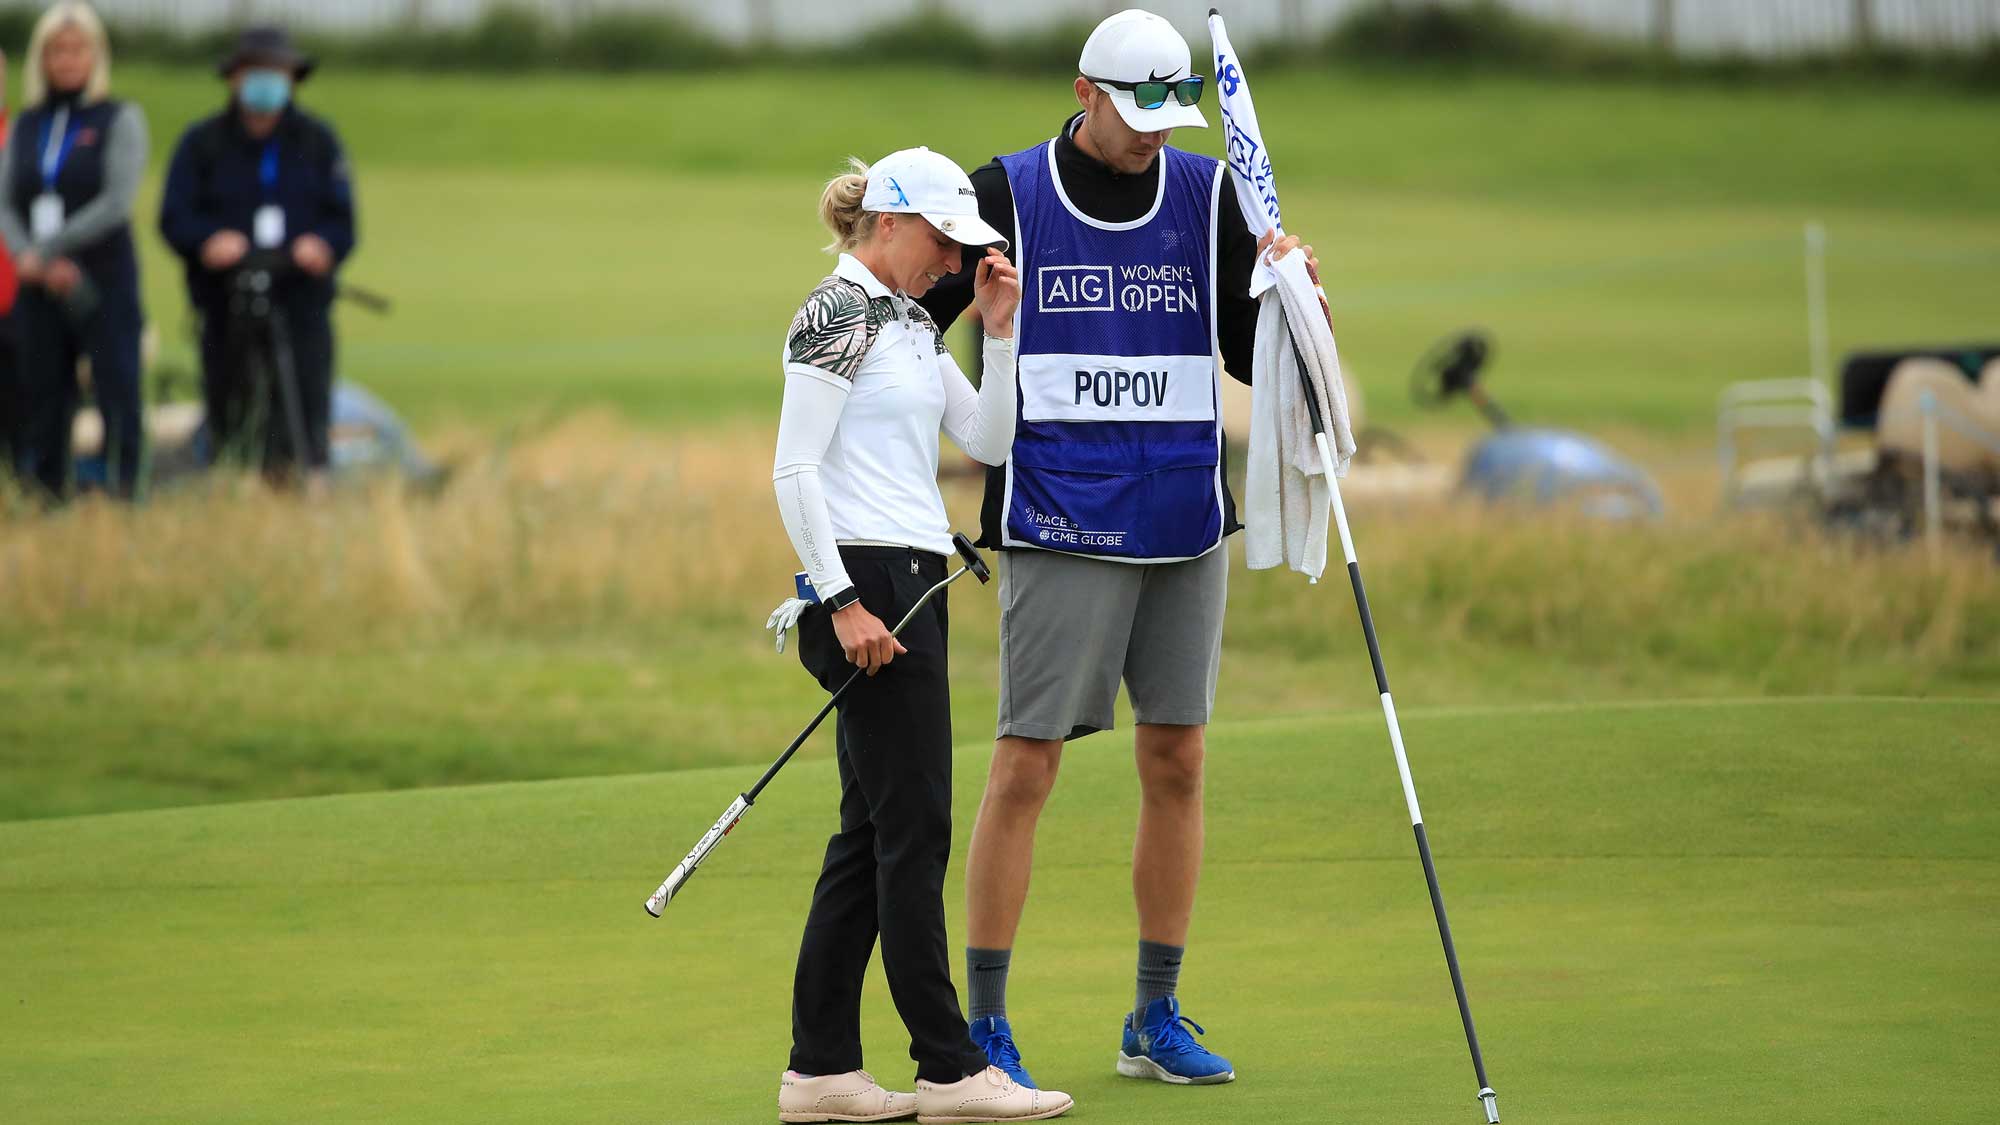 How Sophia Popov went from caddying to winning the Womens 